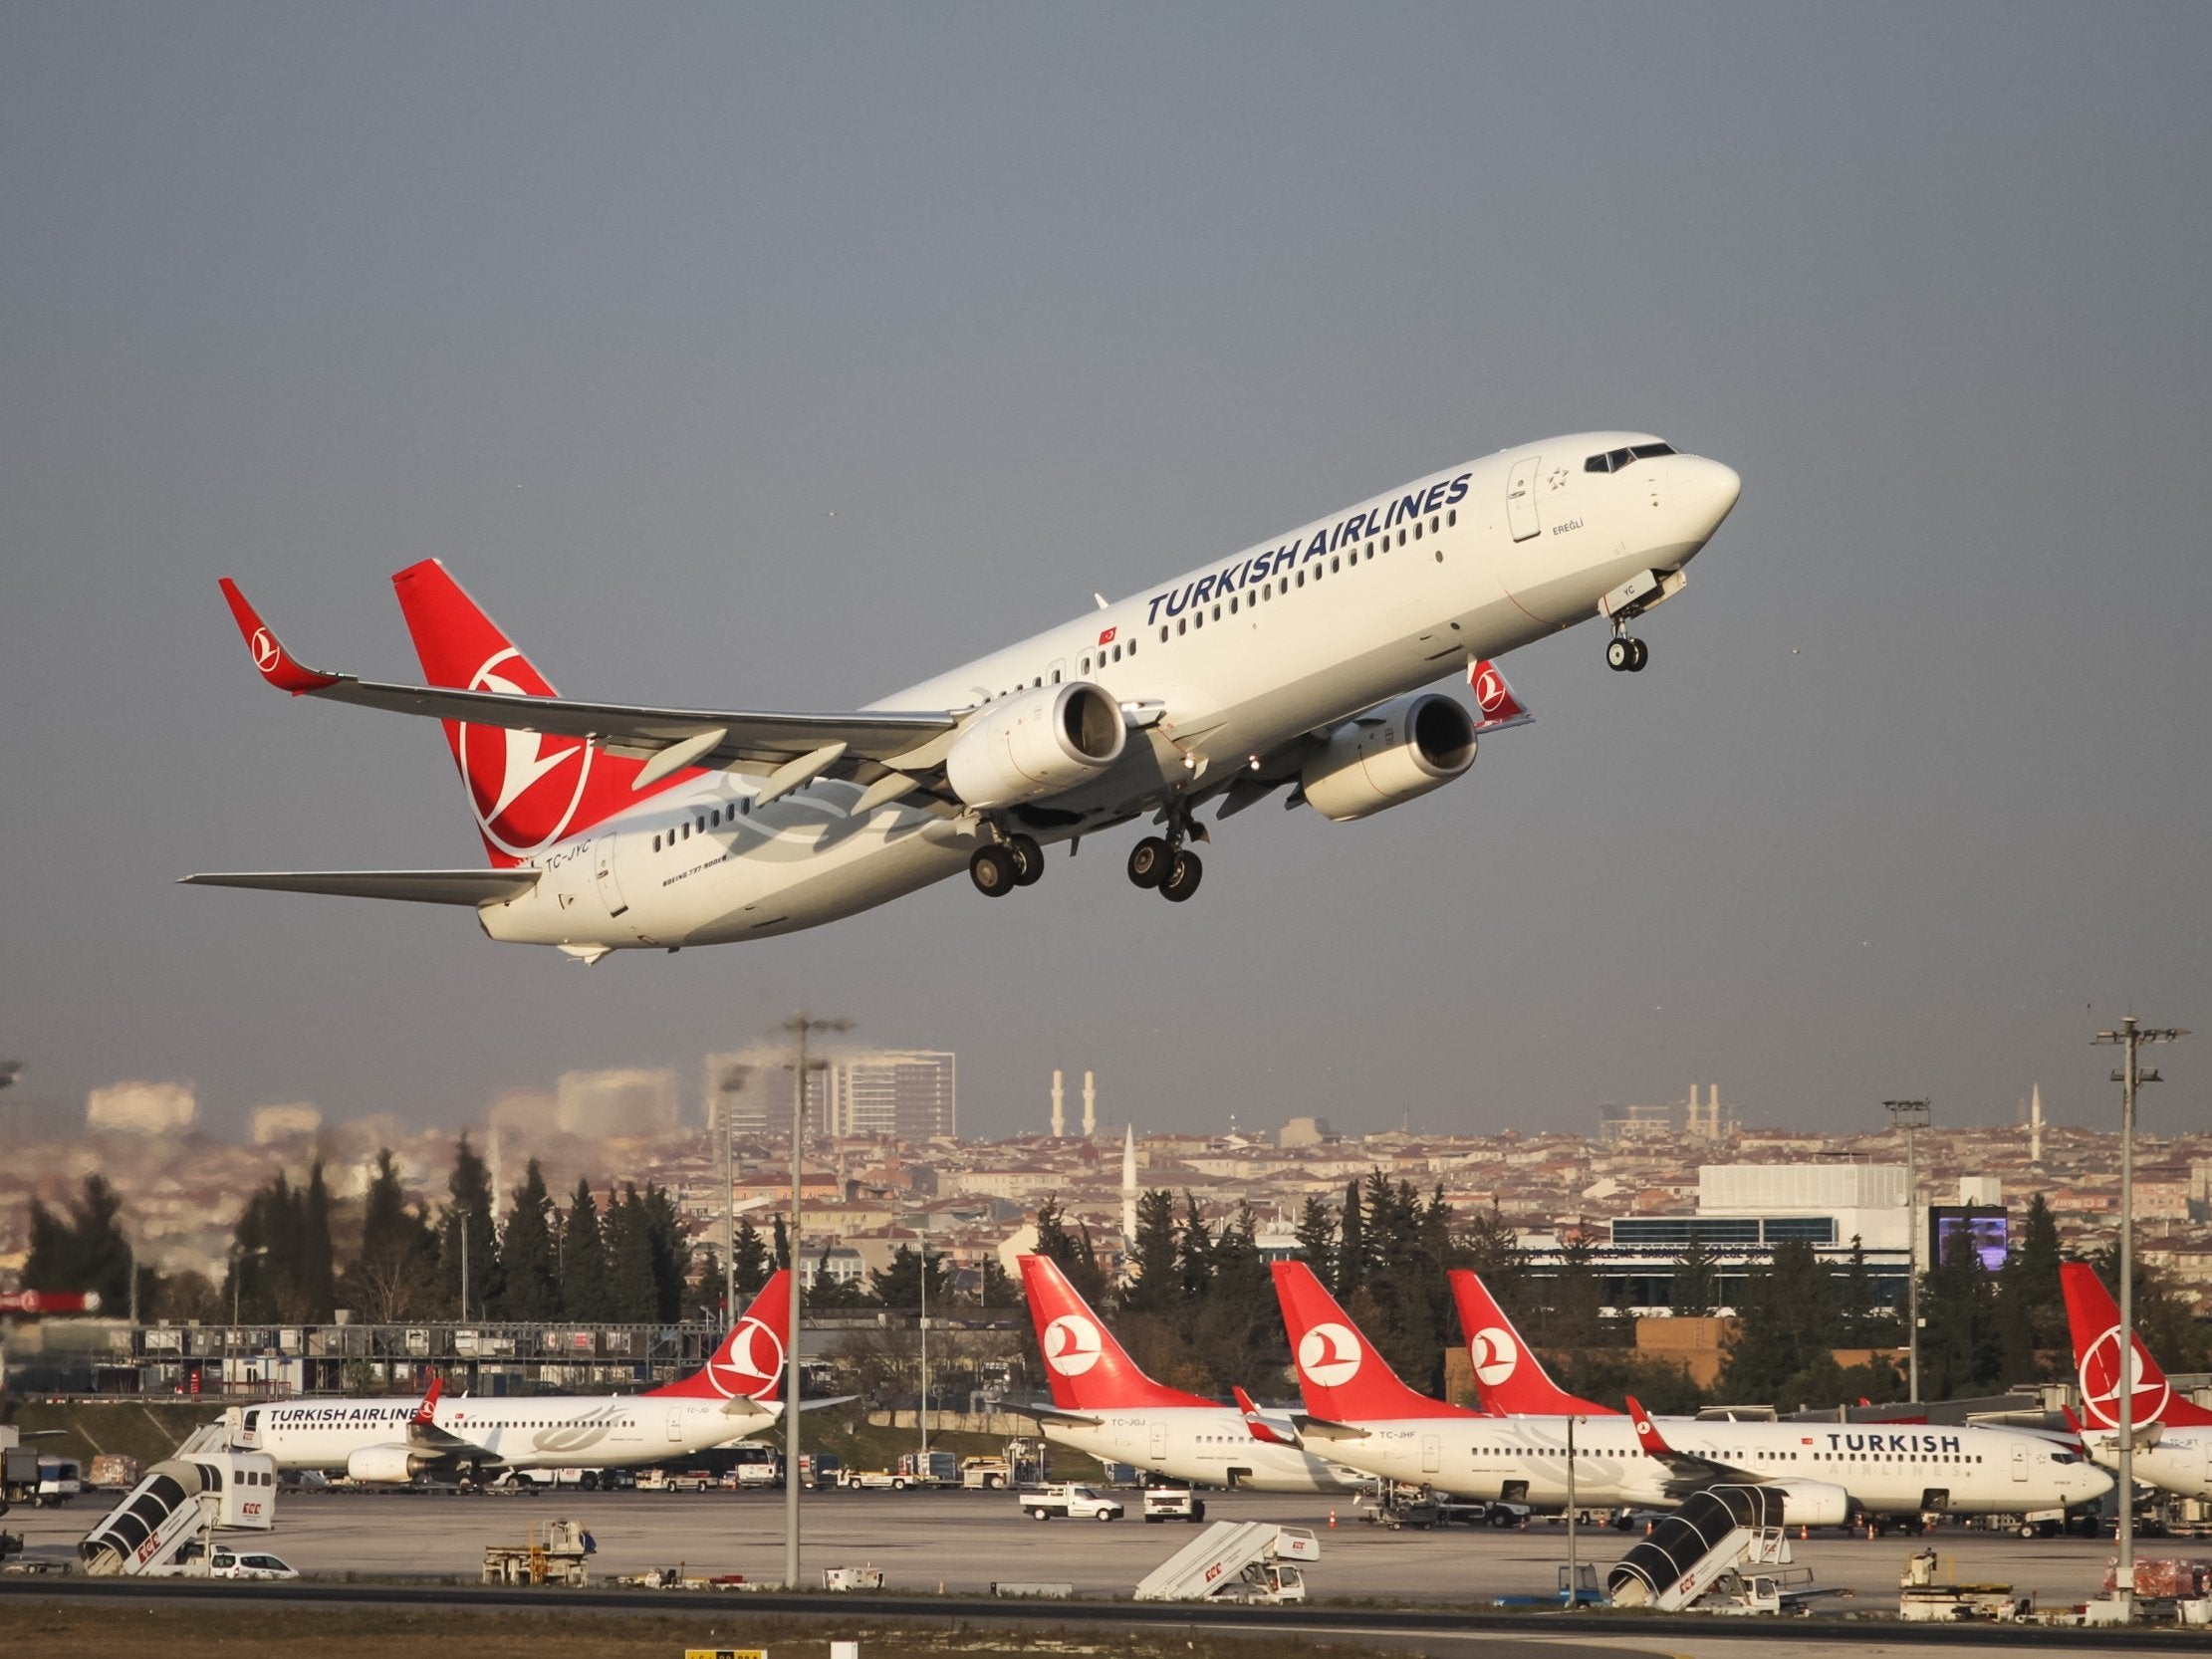 Travel question: Would you recommend flying with Turkish Airlines